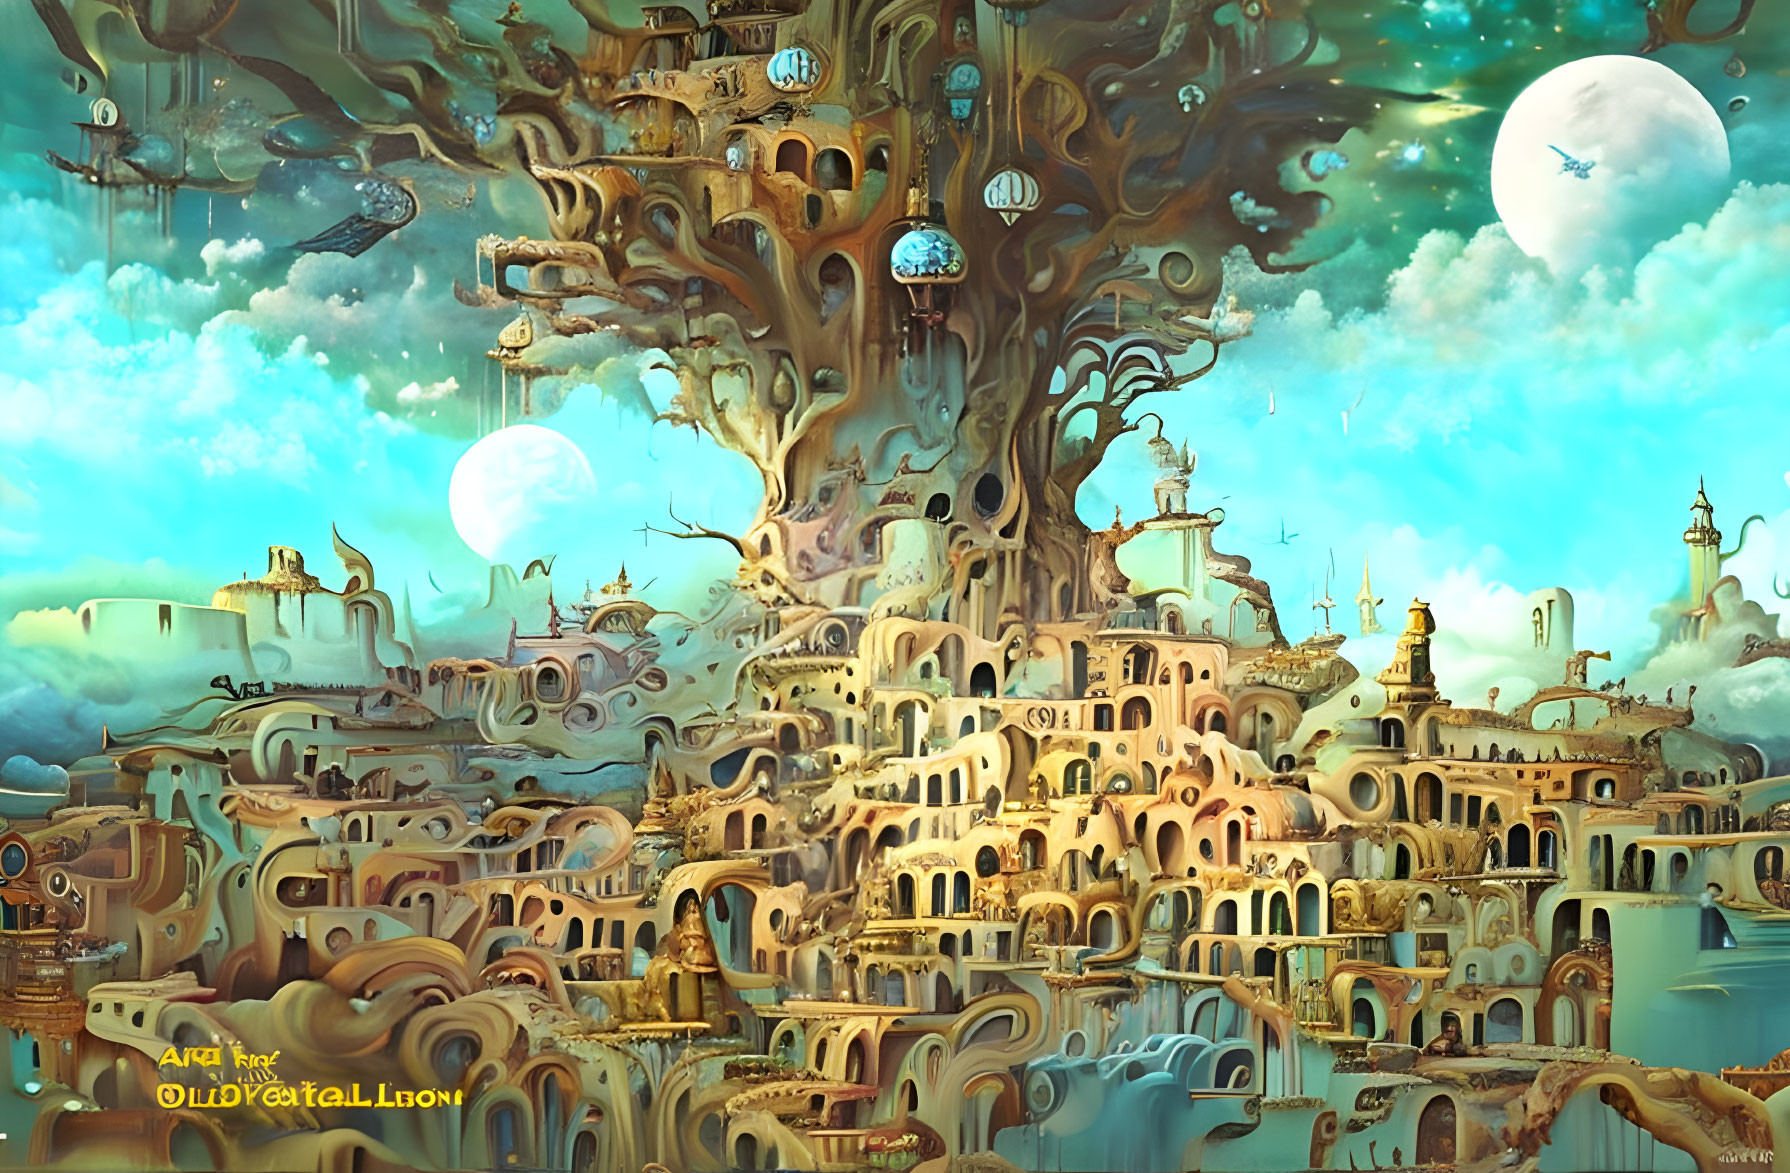 Enchanting fantasy landscape with massive tree and intricate buildings